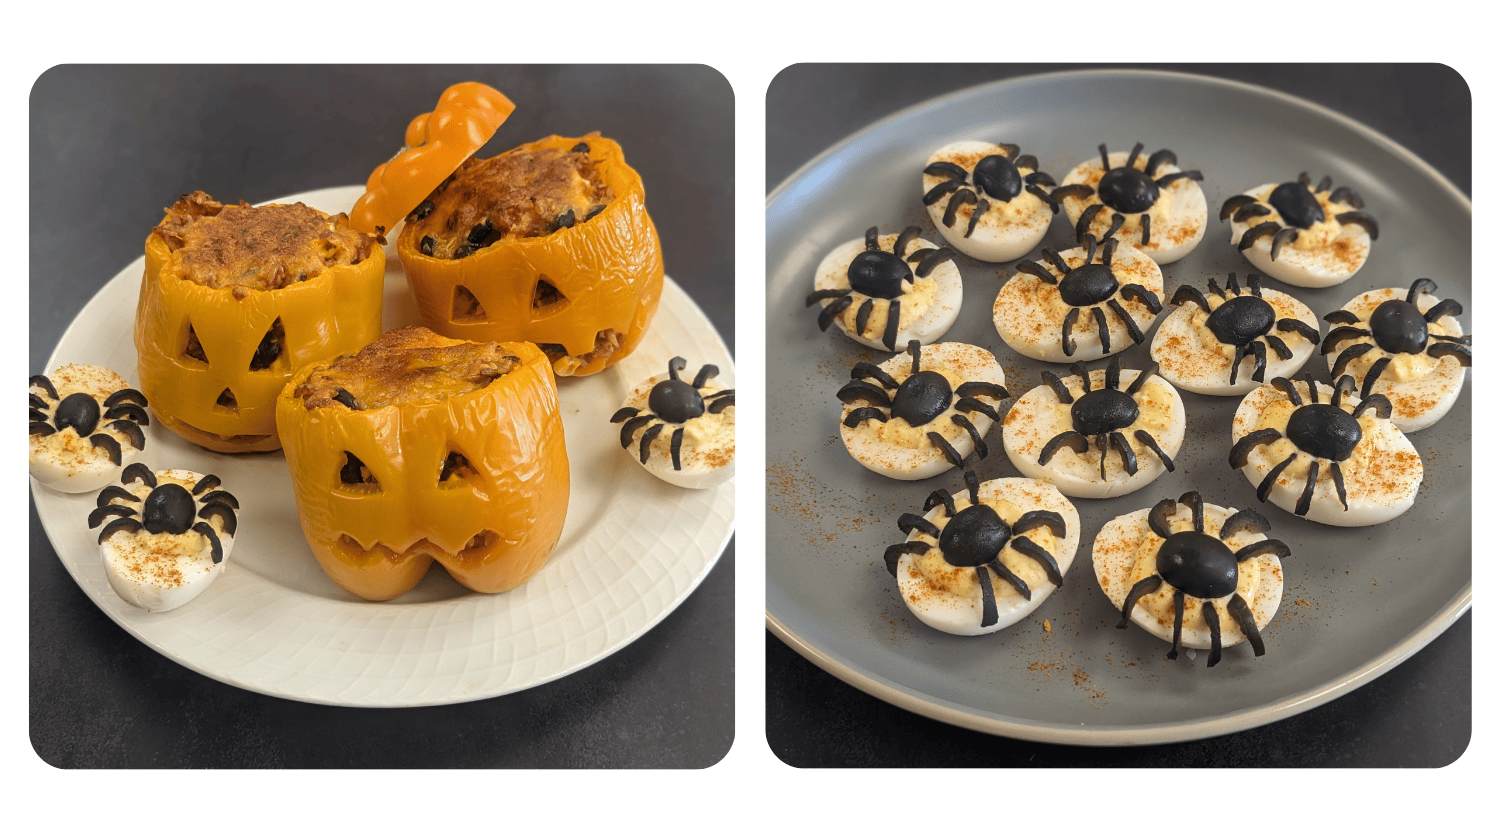 WIC Kitchen: Sugary candy isn't the only way to taste Halloween